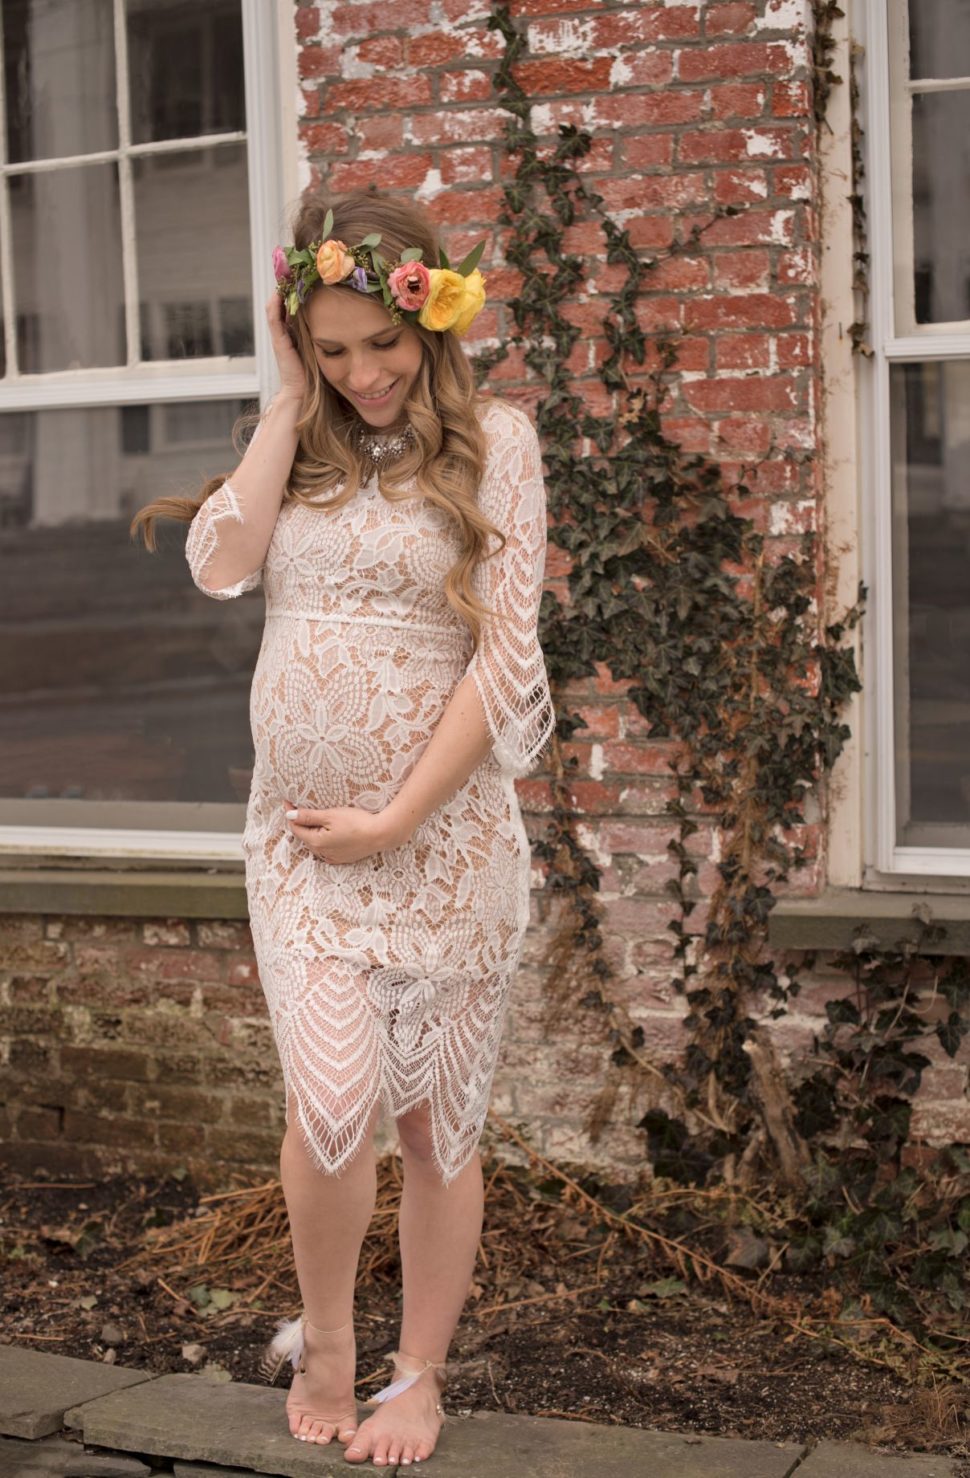 Medium Size of Baby Shower:what Should I Wear To My Baby Shower Cute Baby Shower Outfits For Mom Stylish Maternity Dresses For Baby Shower Maternity Clothes Target Baby Shower Dresses Cute Inexpensive Maternity Clothes Maternity Evening Gowns Plus Size Maternity Dresses For Baby Shower